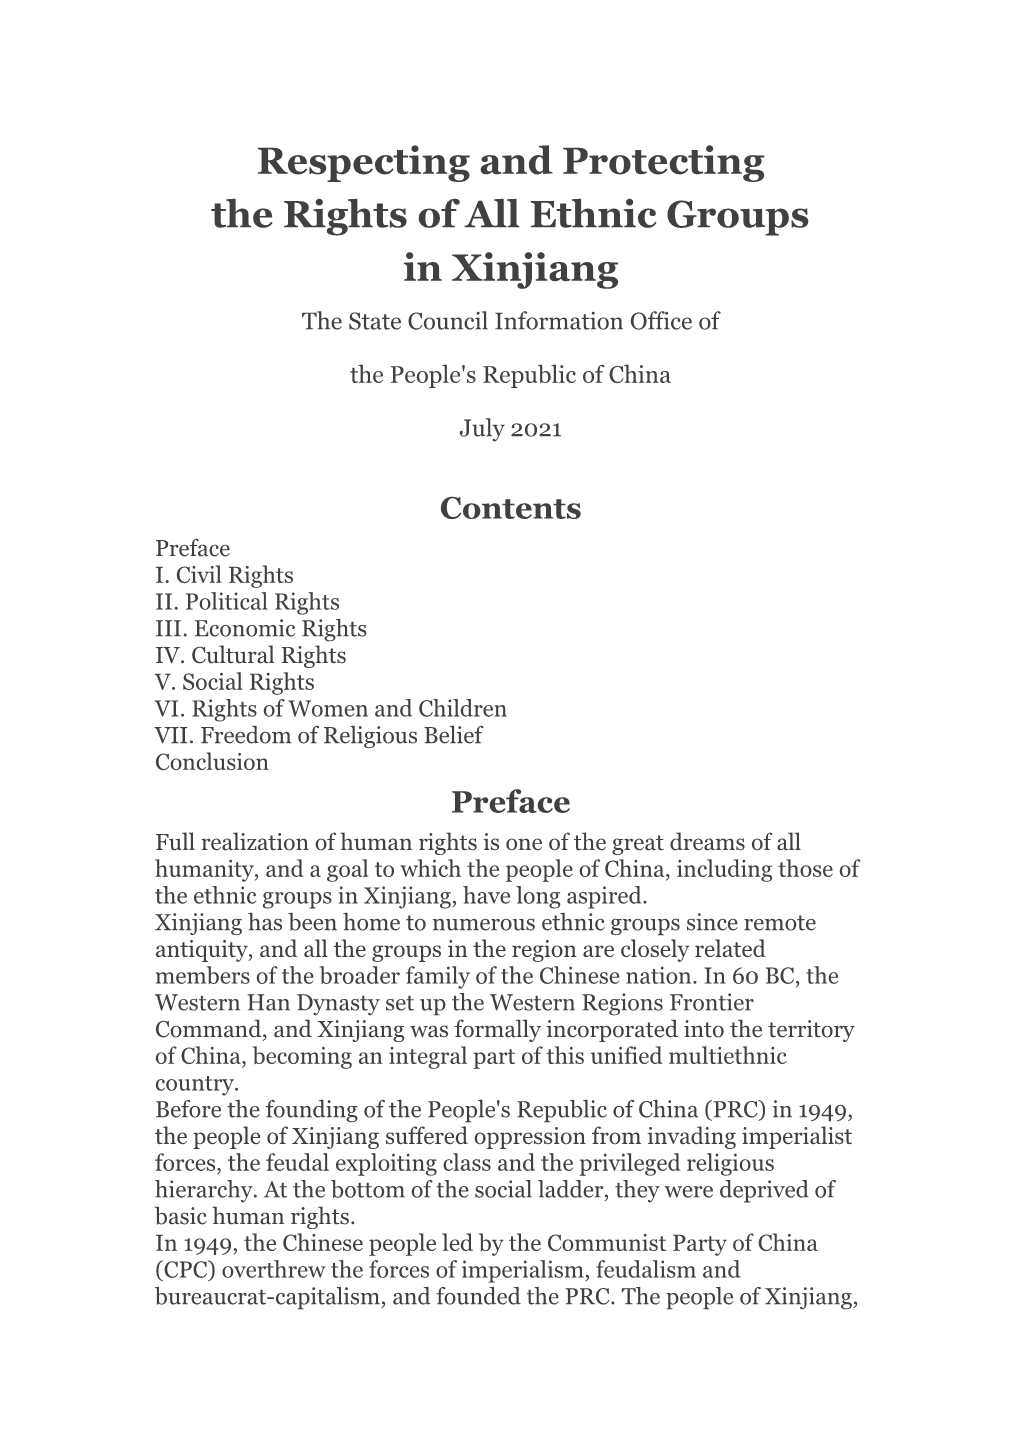 Respecting and Protecting the Rights of All Ethnic Groups in Xinjiang the State Council Information Office Of